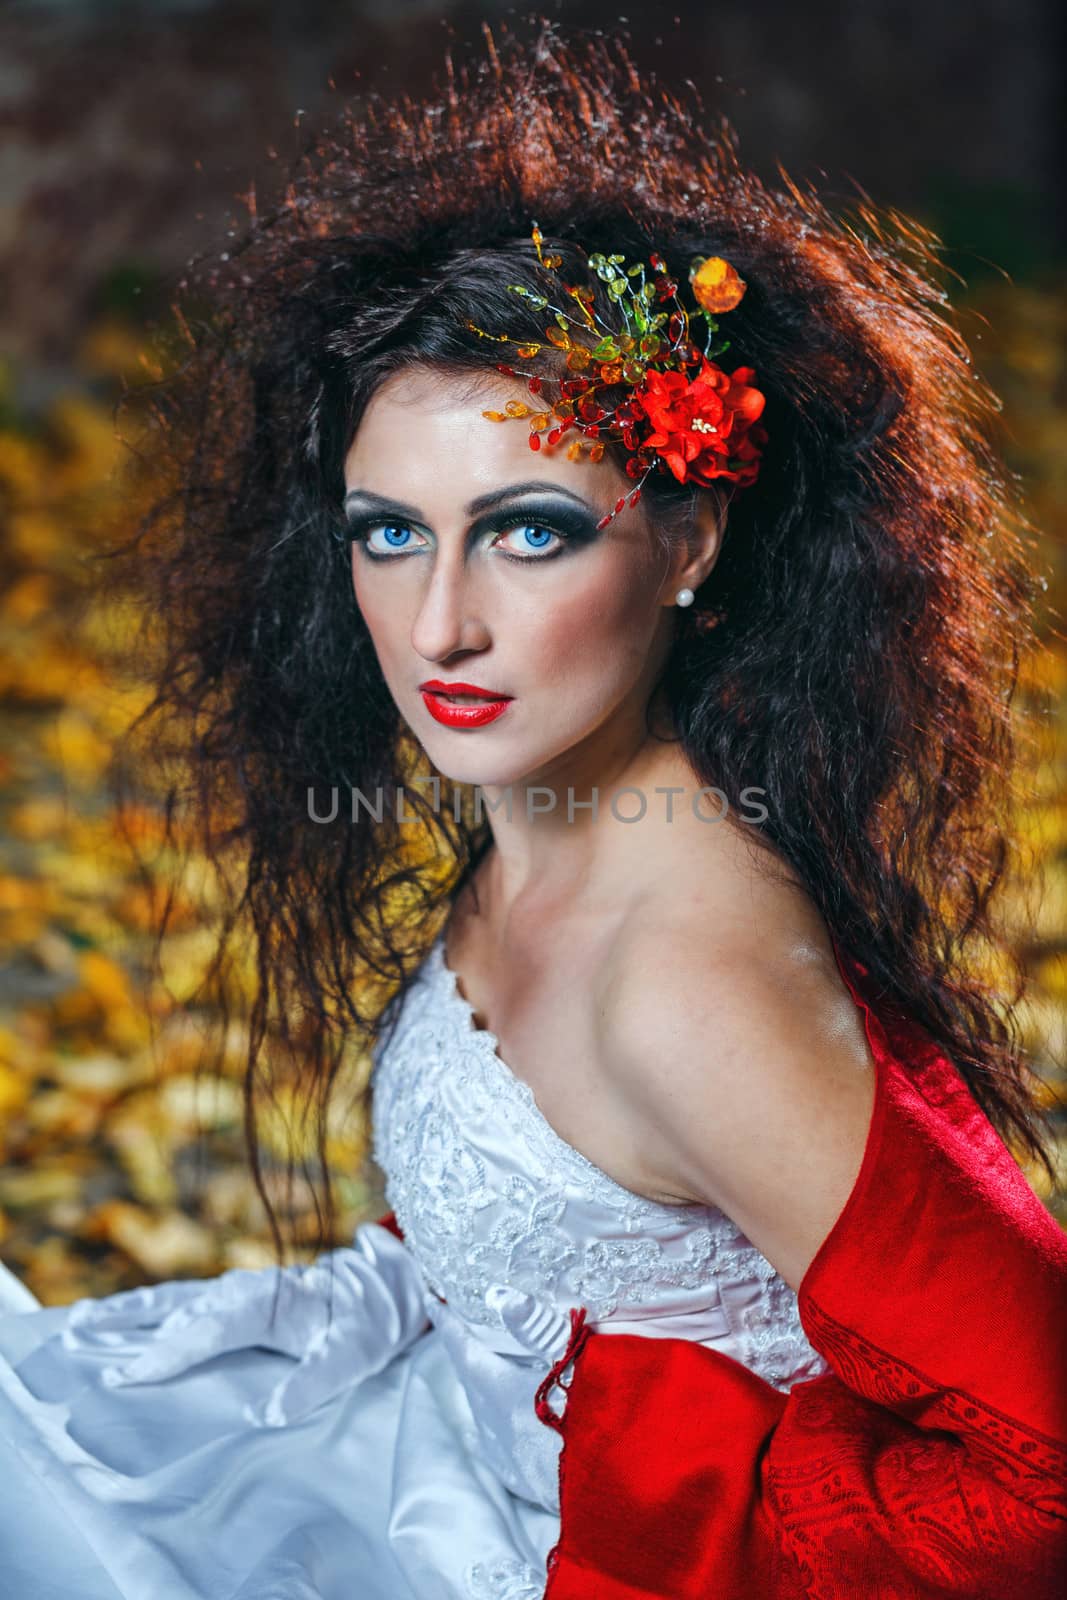 Attractive bride in a wedding dress with bright makeup, red shawl